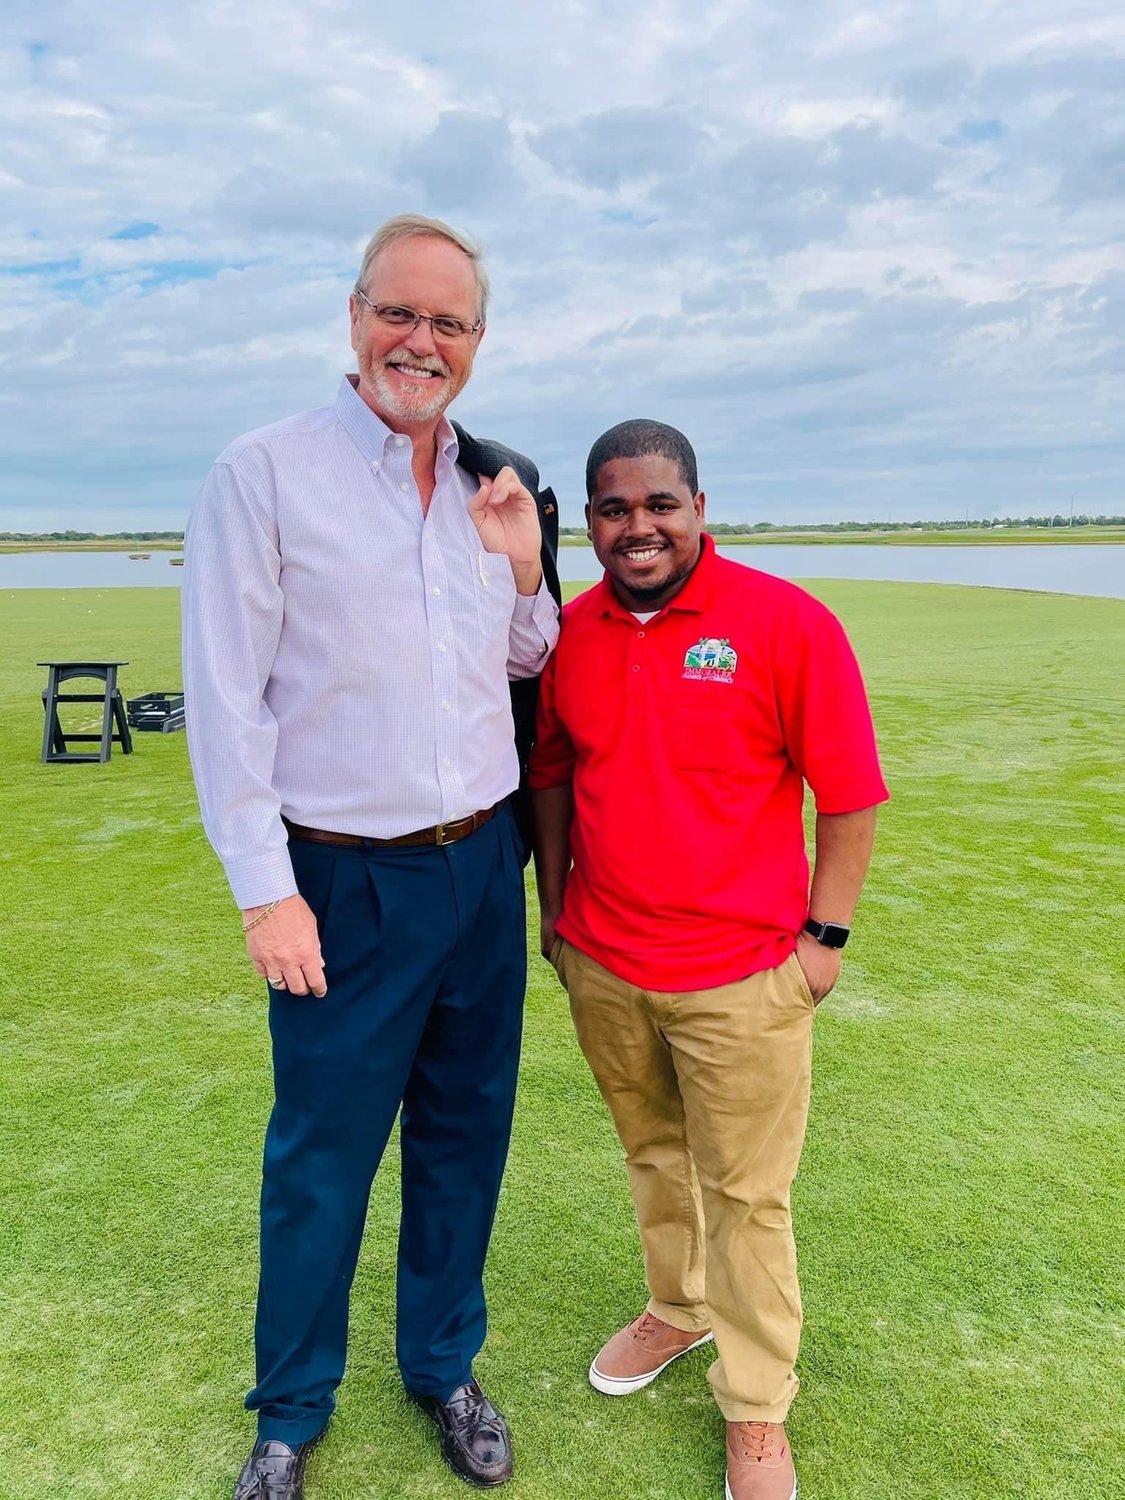 Collier County Commissioner William L. McDaniel, Jr. and Jonas Mervilus work together to promote equity and diversity in Immokalee.